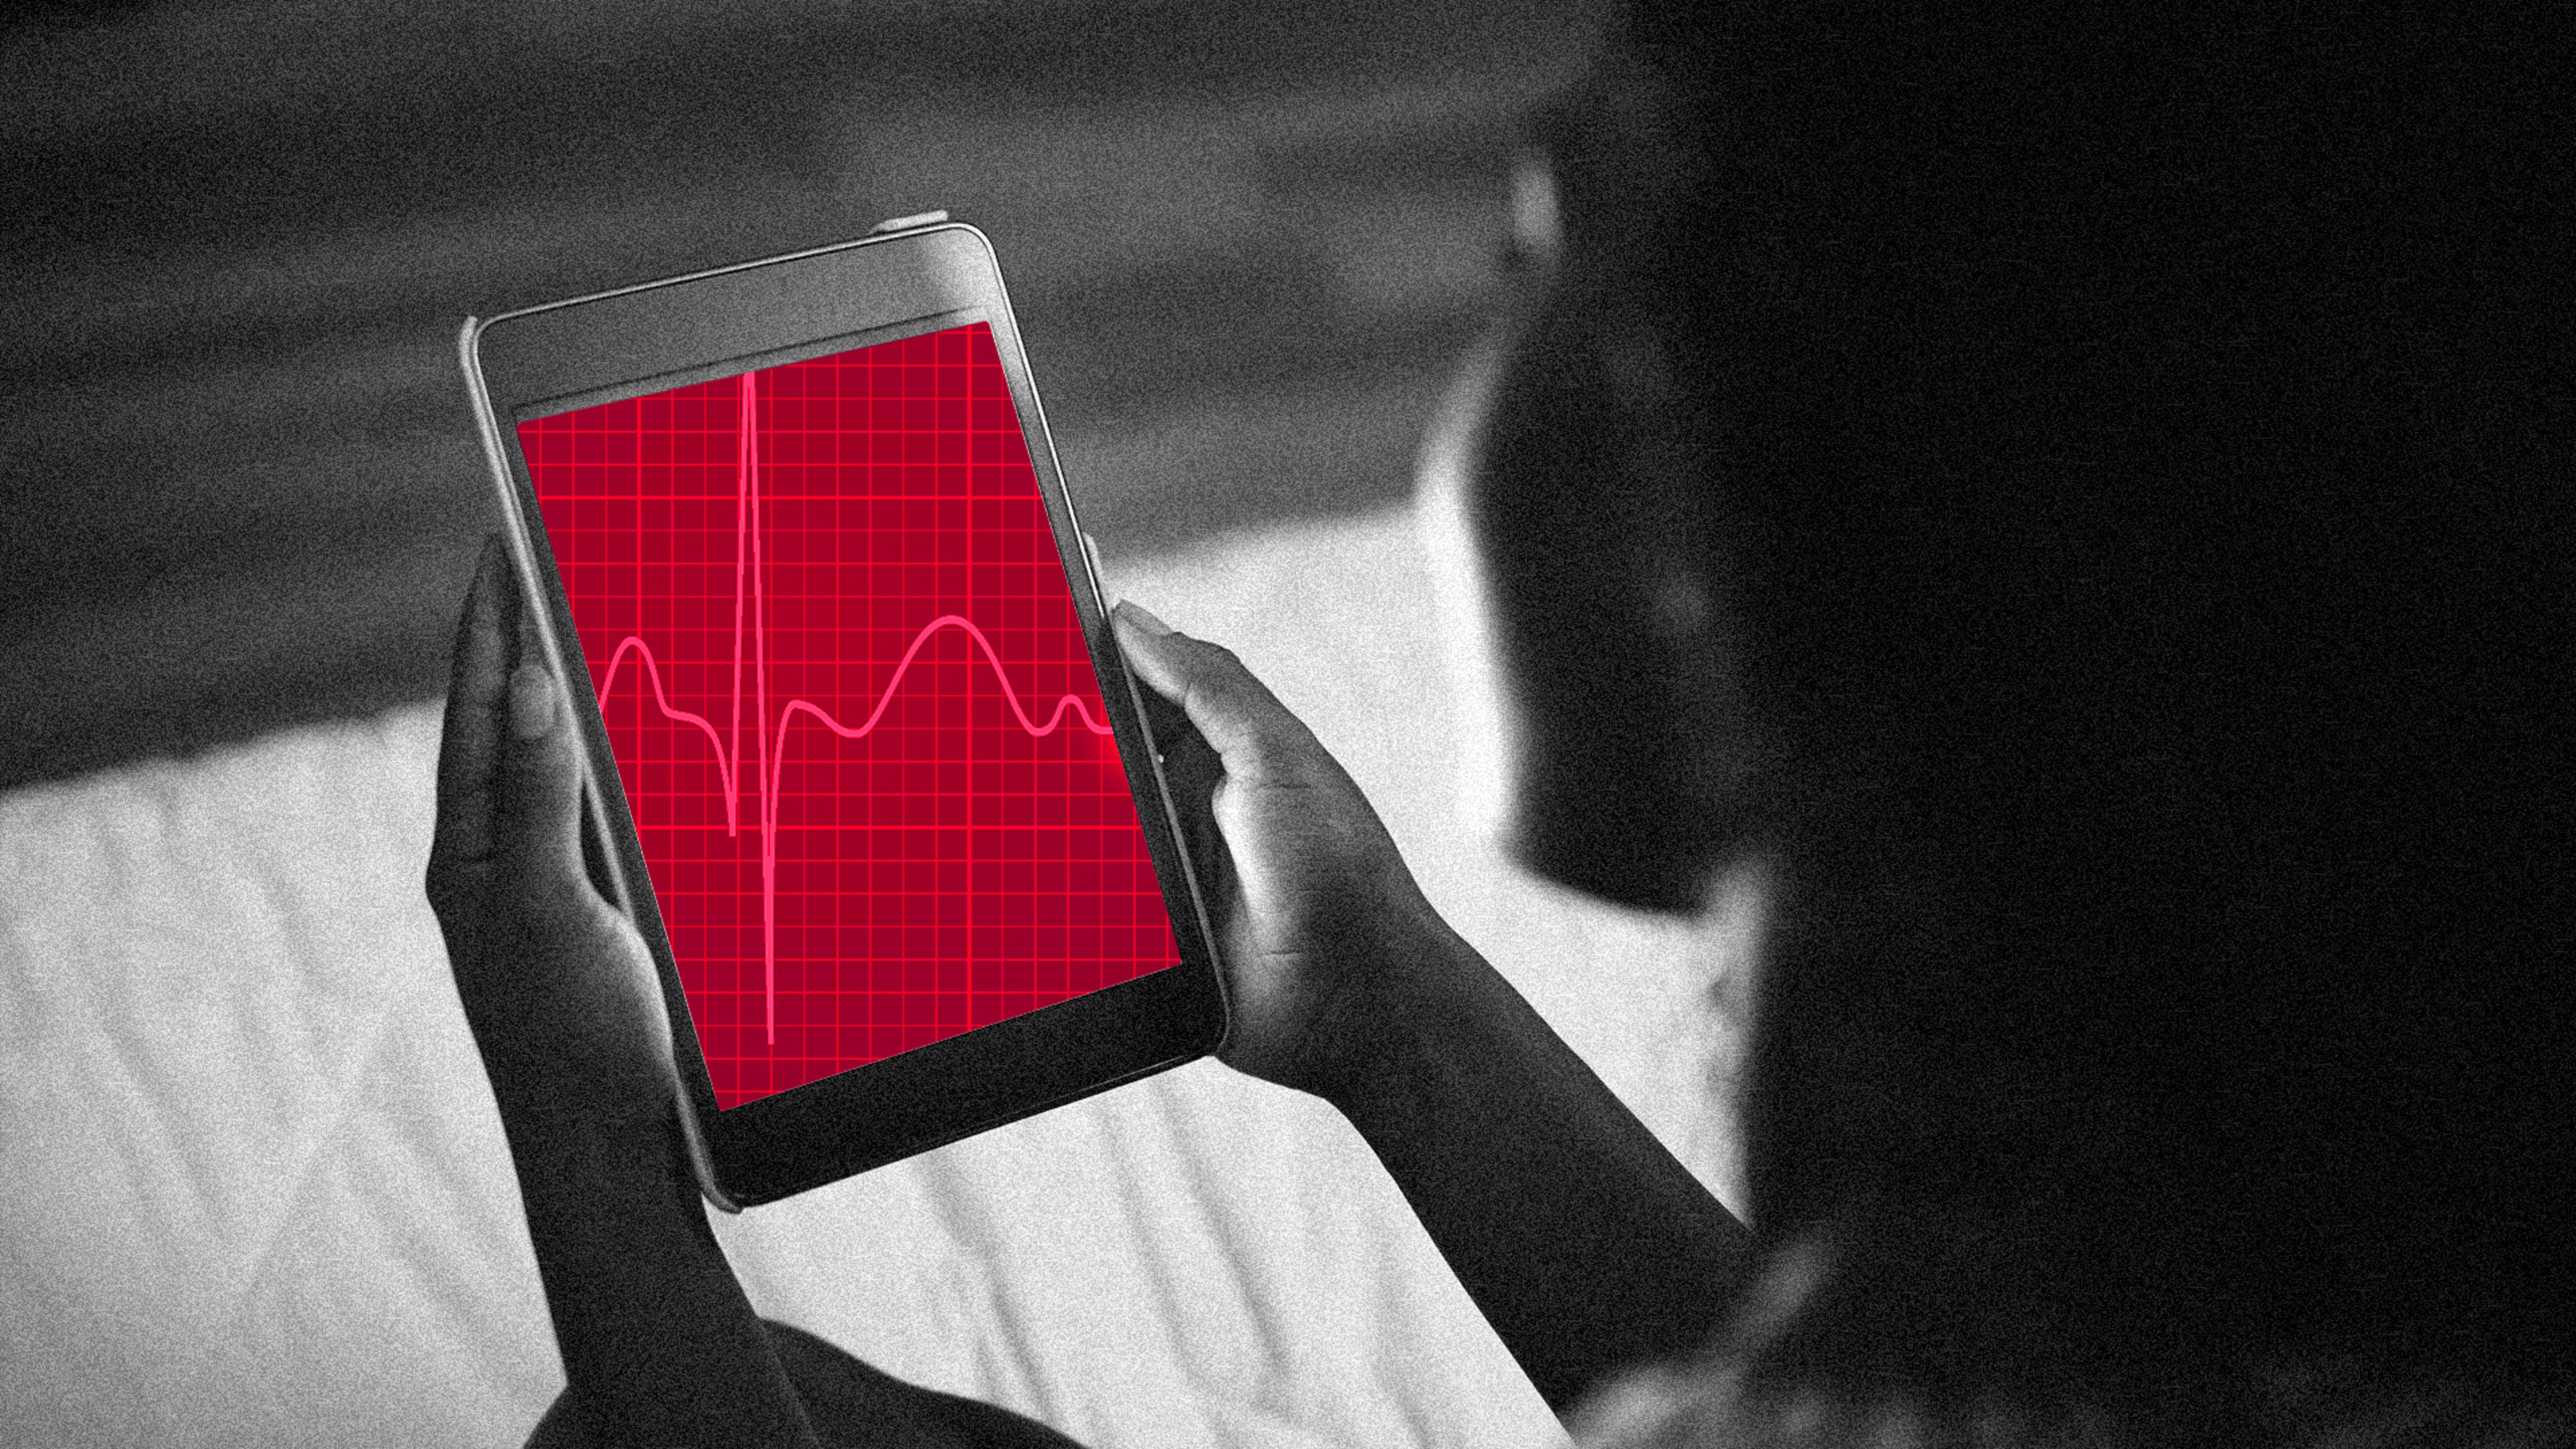 Algorithms can now detect your heart rate and stress levels over video chat